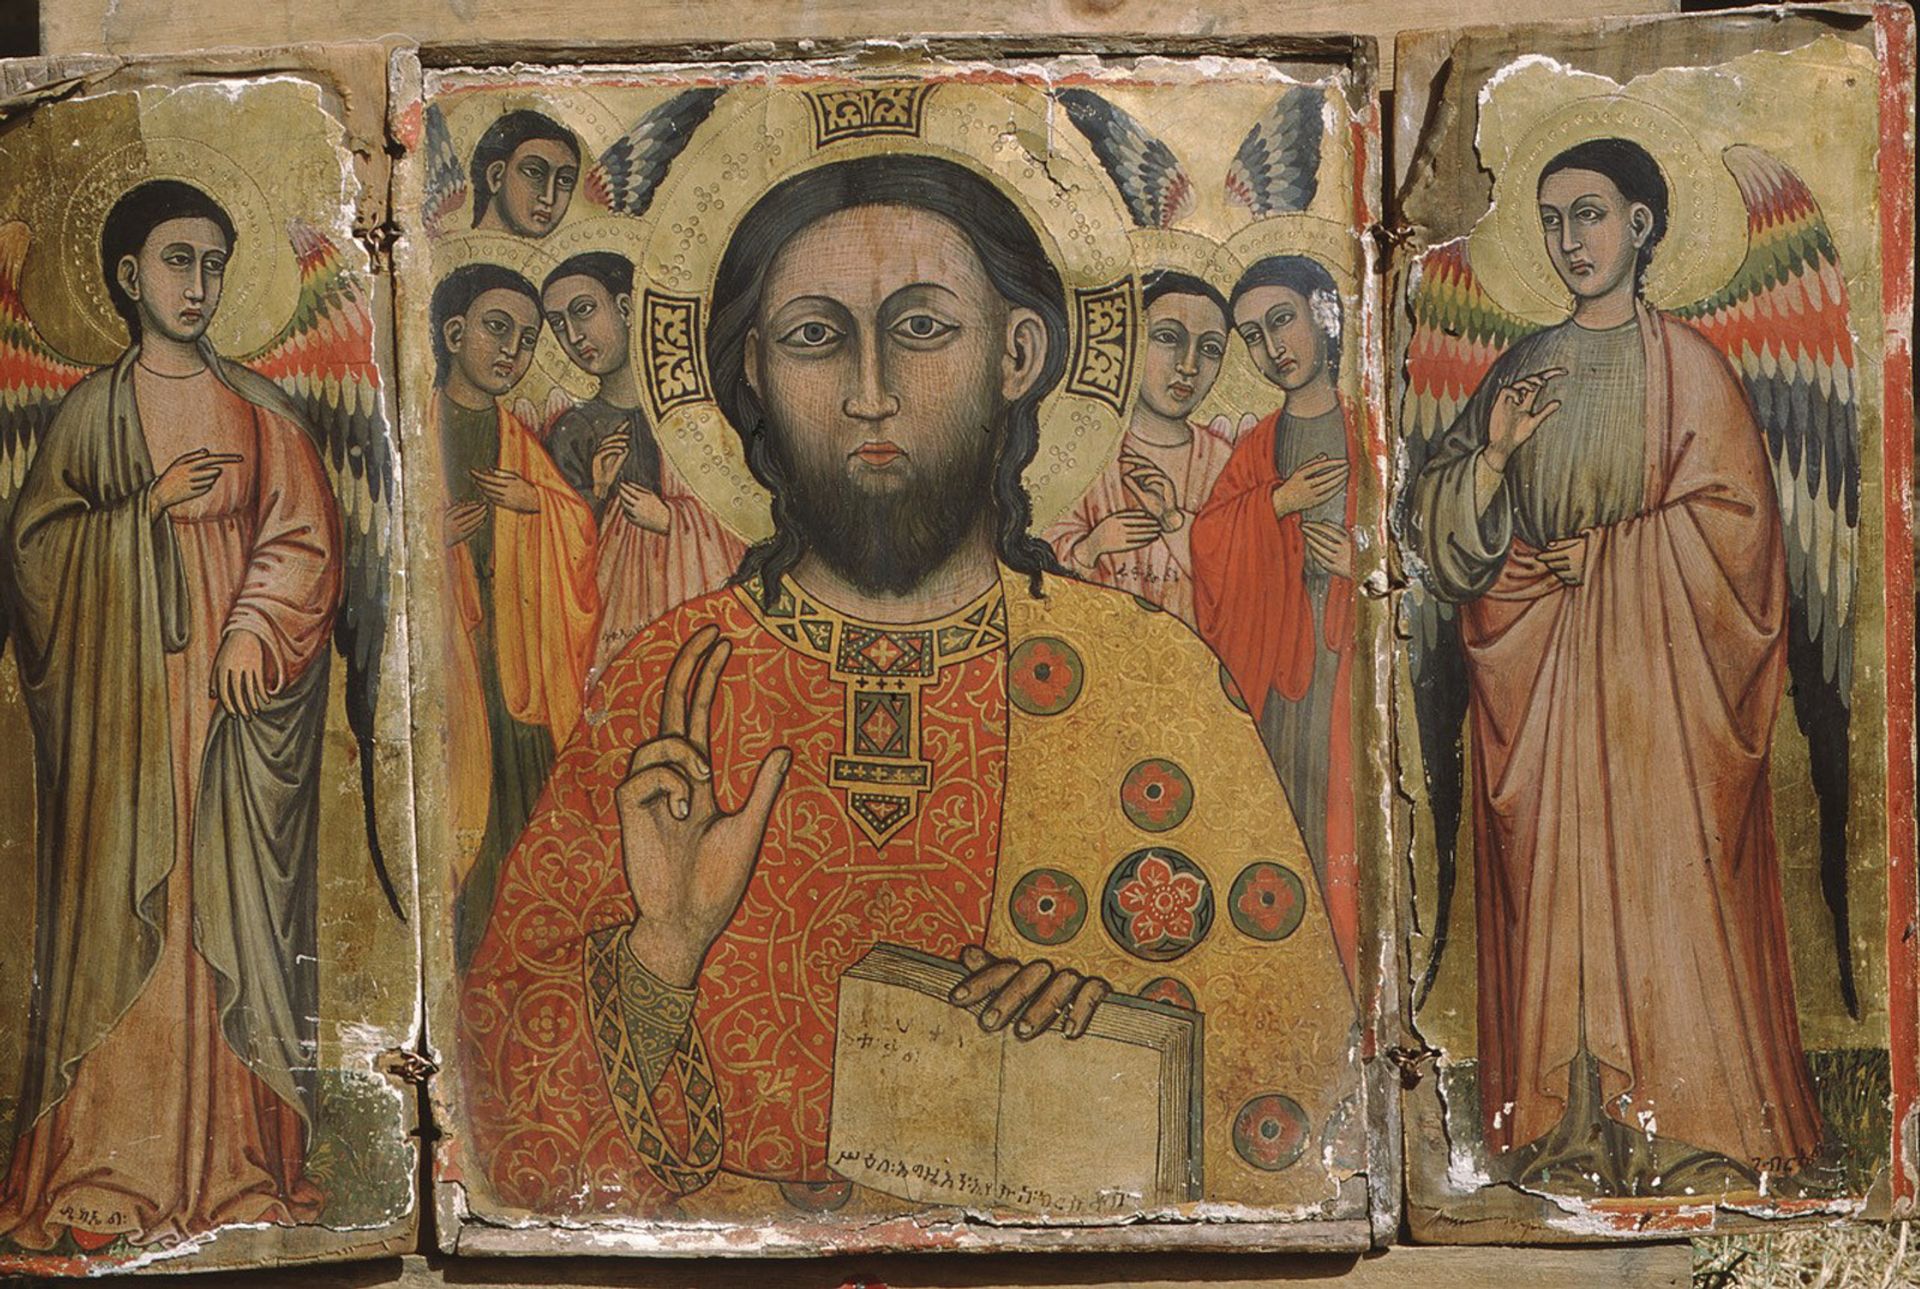 The triptych Image of Our Lord Jesus Christ was until now thought to have been made in Byzantium in the mid 1400s, but new research has identified characteristics that match that of work done by Sienese painters in the previous century Jacques Mercier and Alain Mathieu